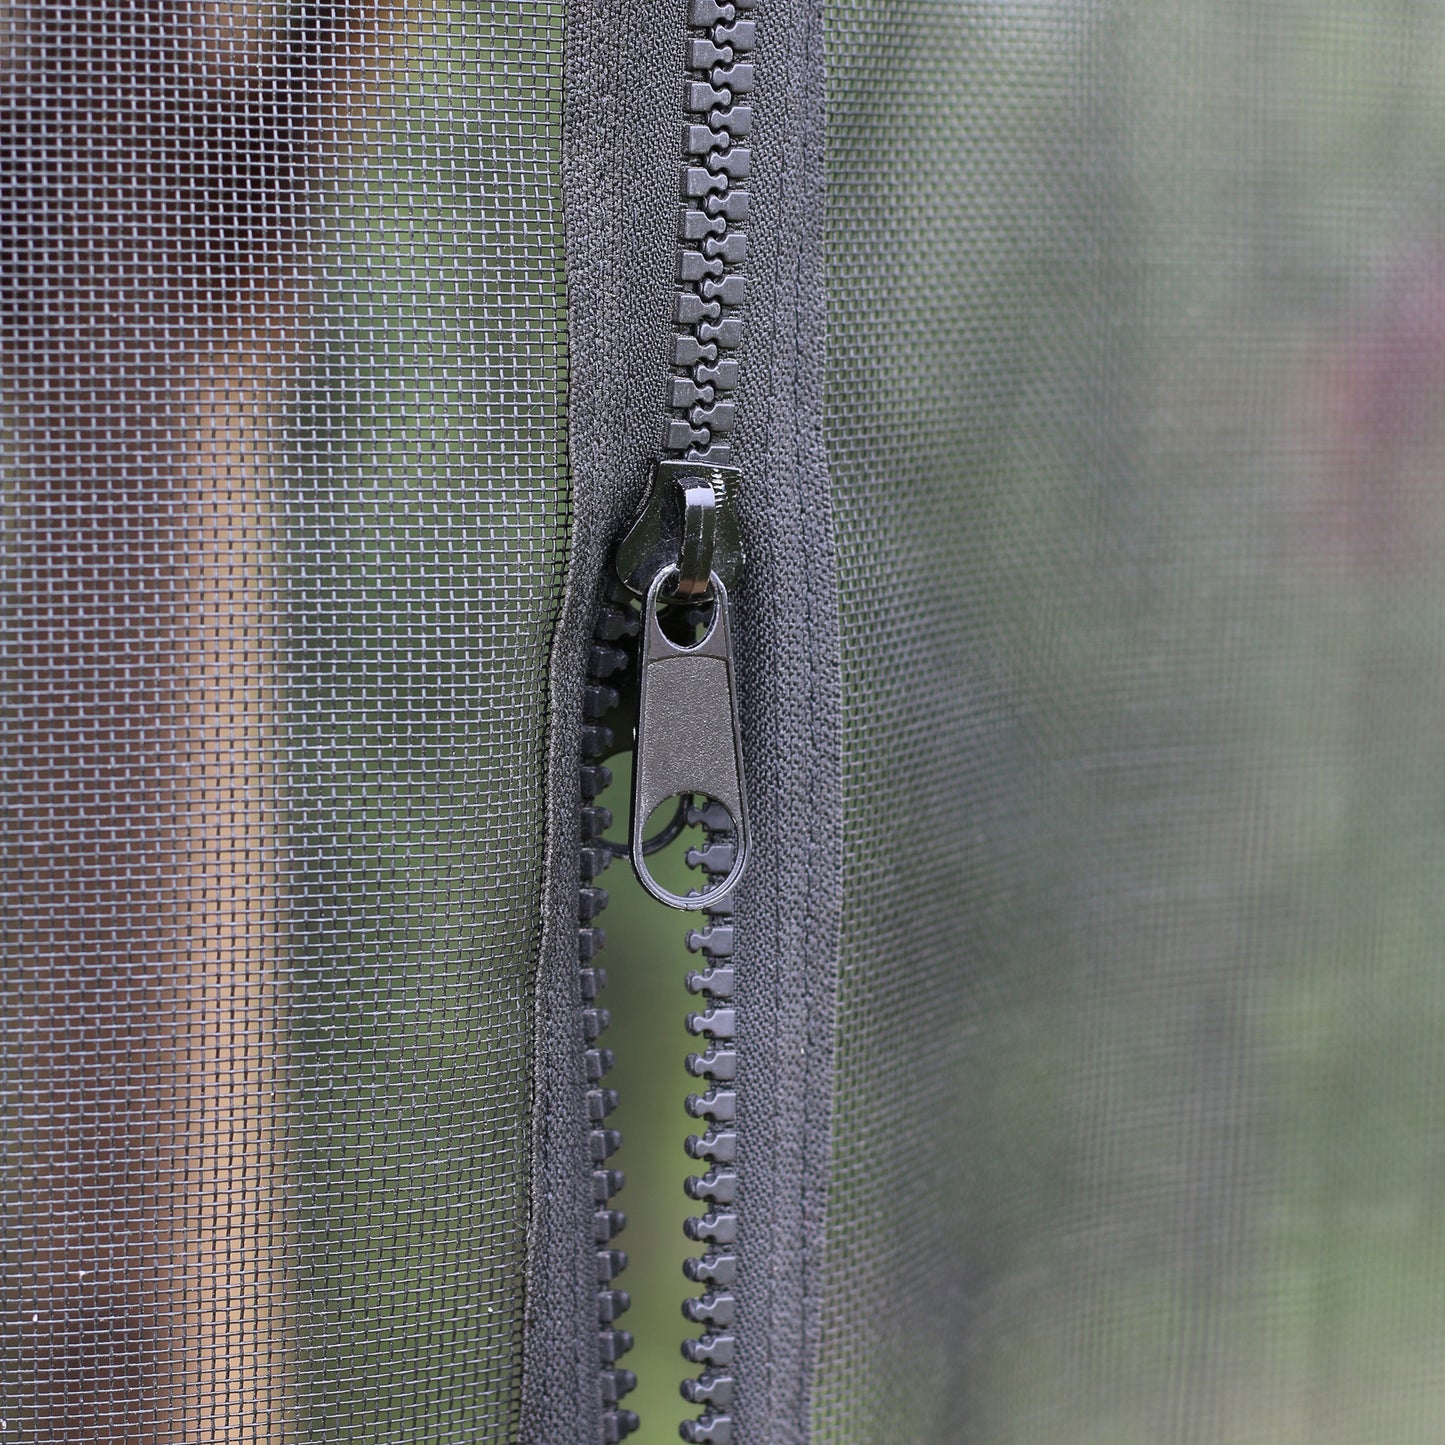 10 x 10 Pavilion Mosquito Mesh Kit by Yardistry